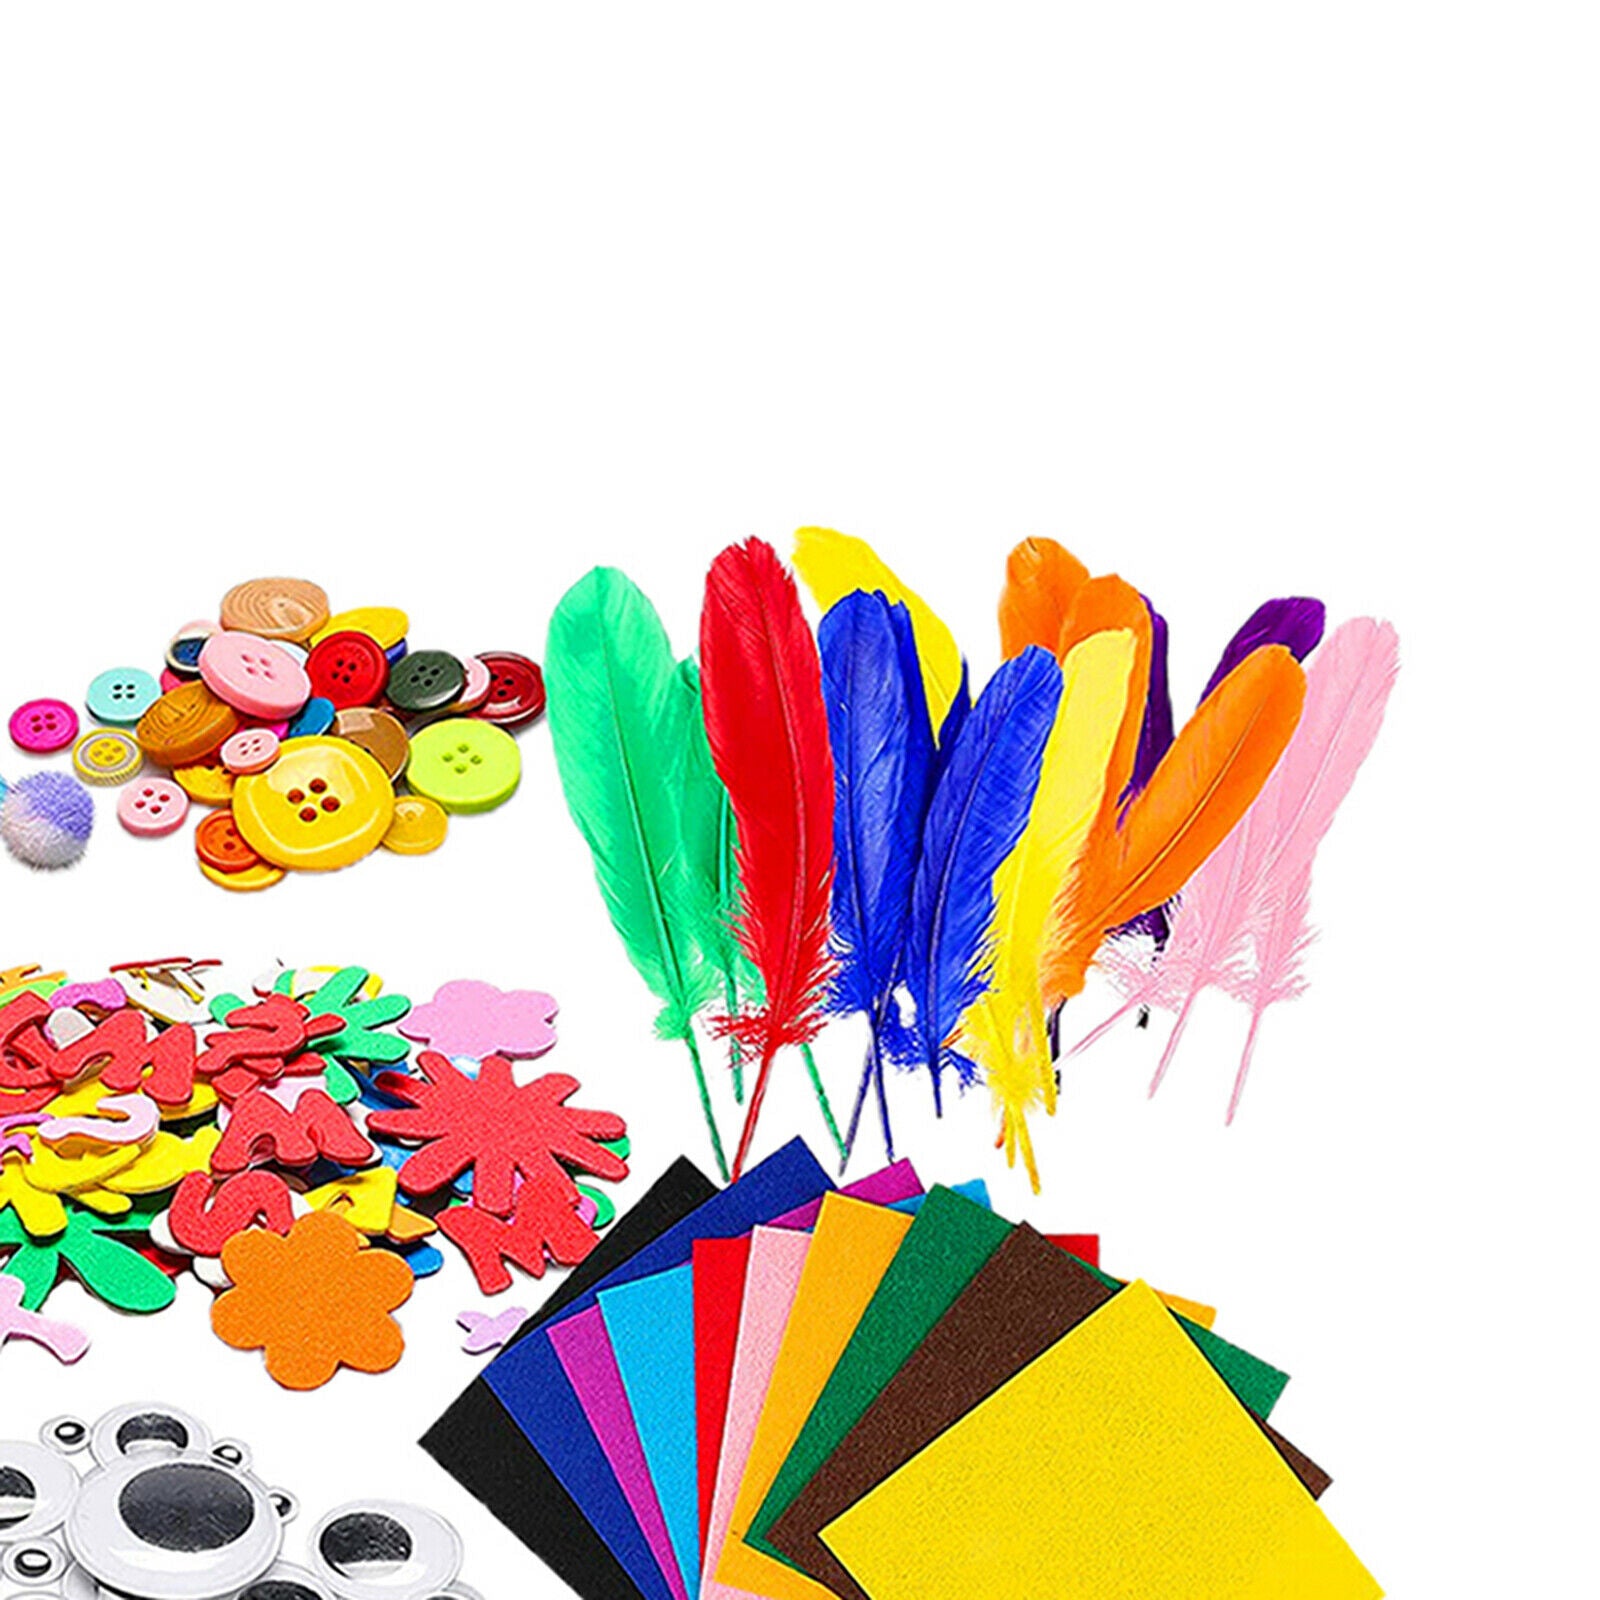 DIY Arts & Craft Set Colorful Feathers for Boys Girls Toddlers Ages 6 7 8